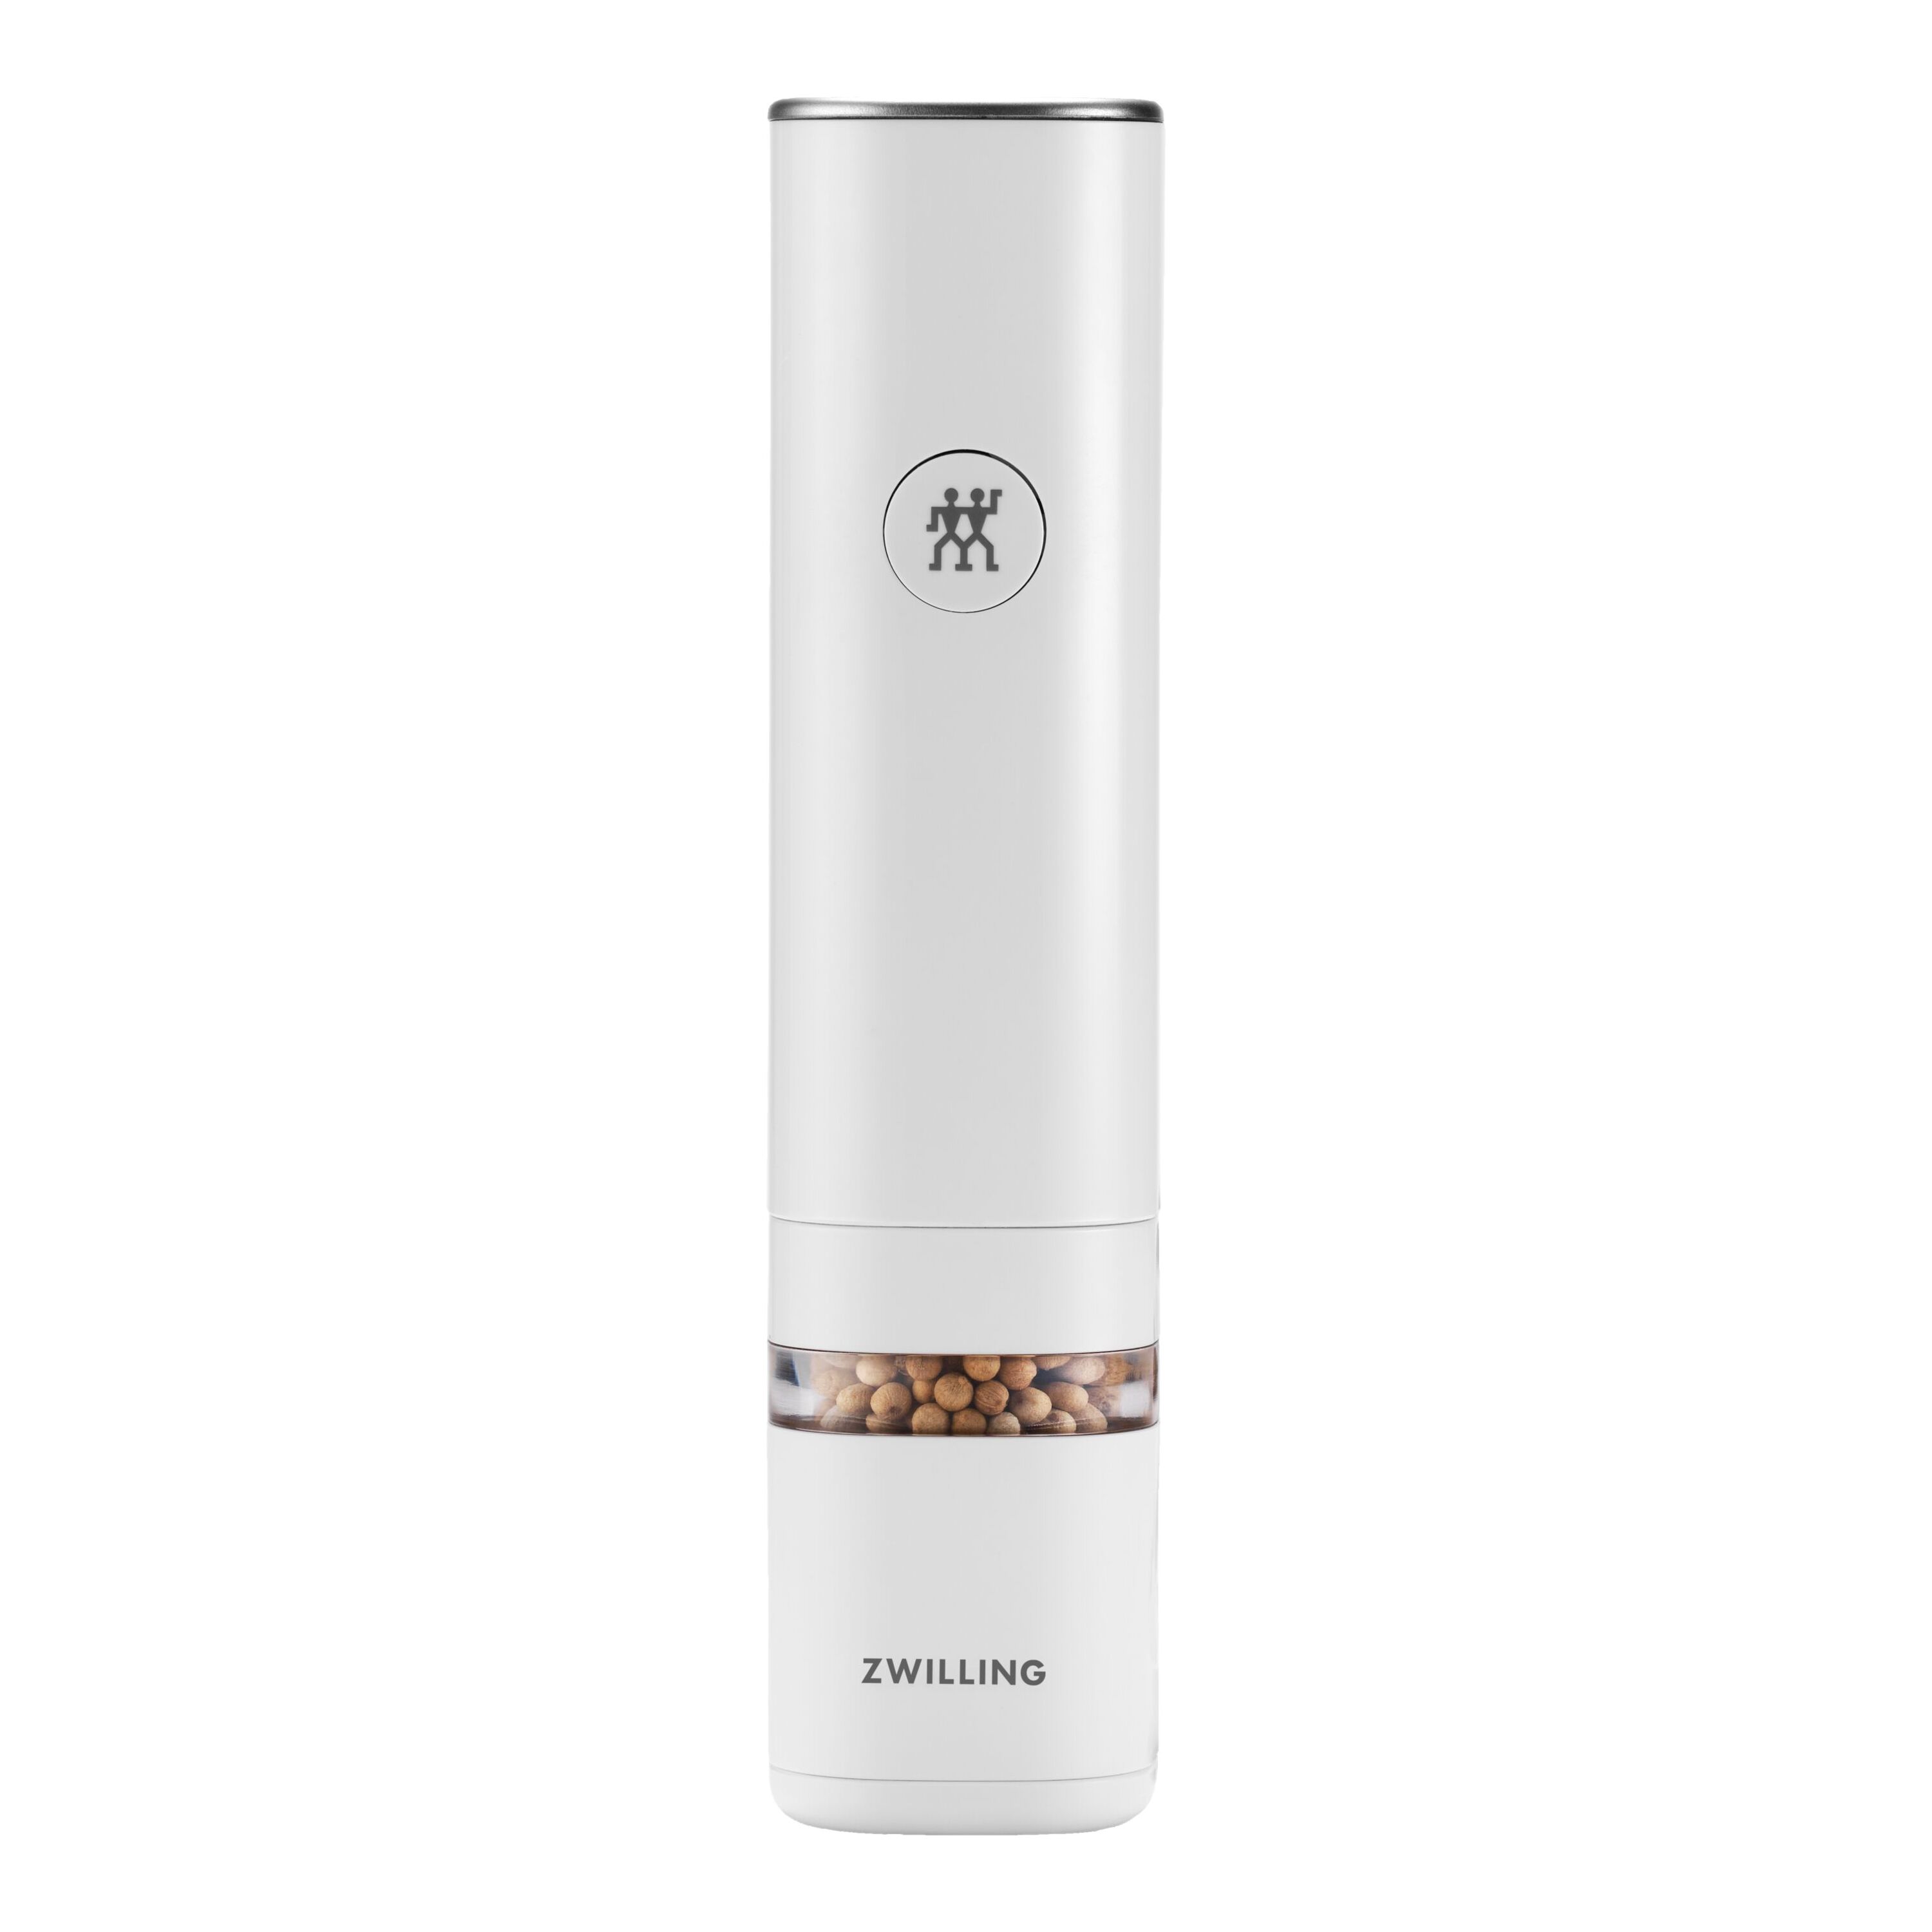 Zwilling - Twins Specials Salt & Pepper Mill Mini, Stainless